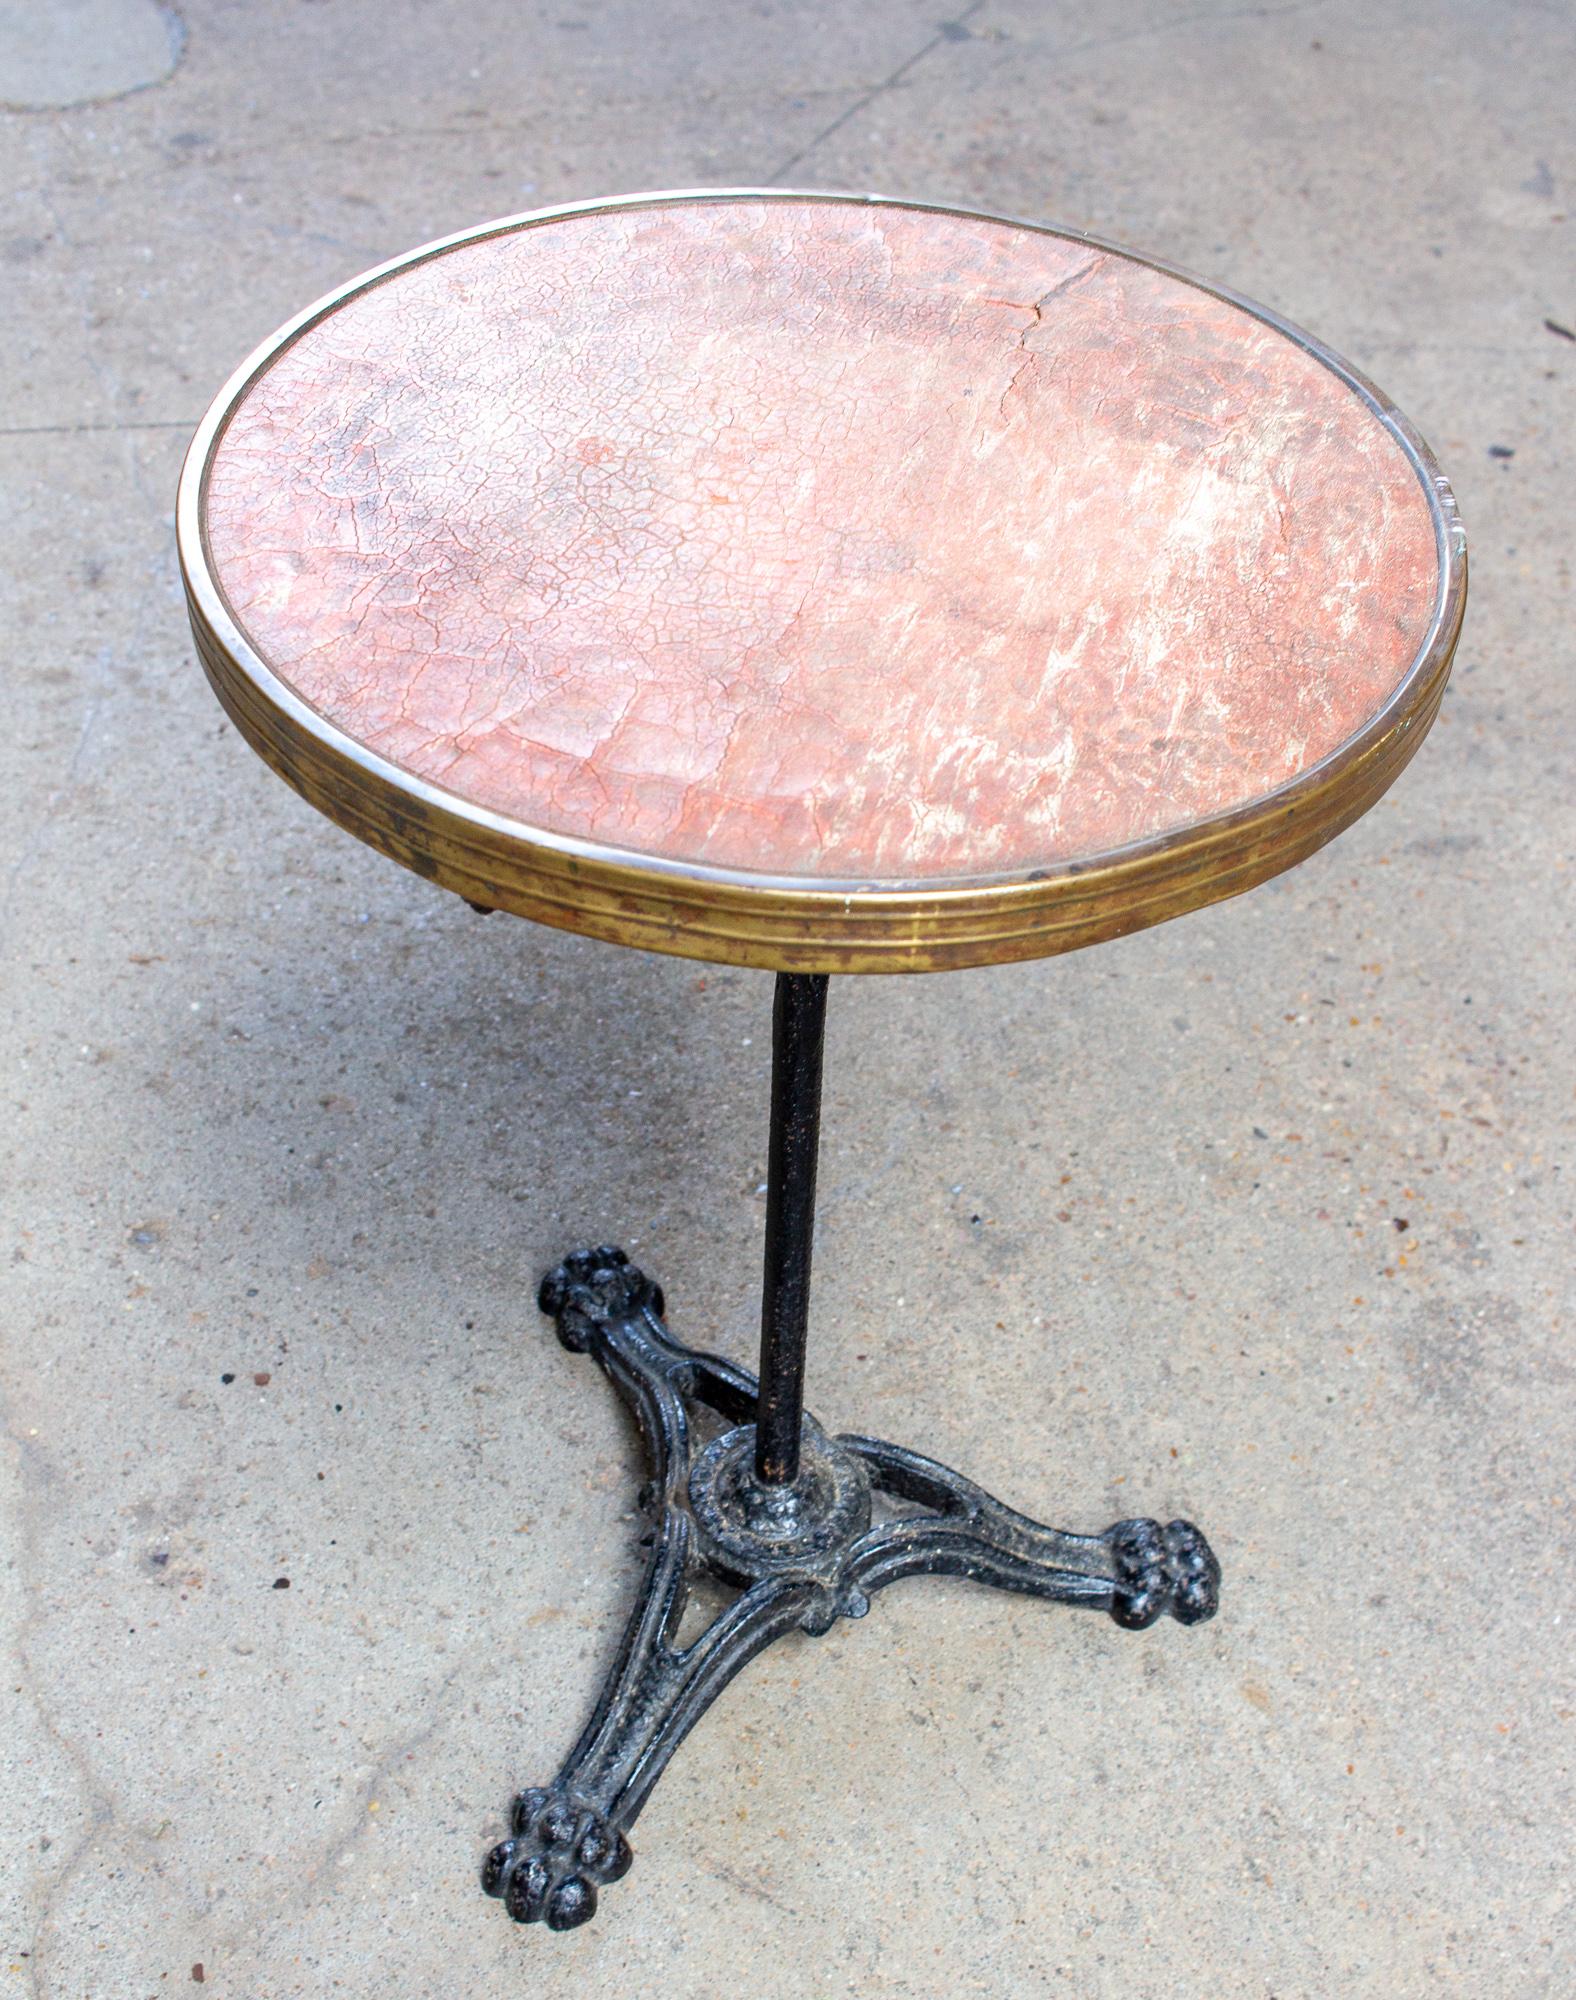 A classic French iron bistro table, this piece features a black iron base with paw-foot detail and a brass rim surrounding a distressed leather top. The leather is worn and cracked, and is a rich cognac color that leans red. The top and brass edge